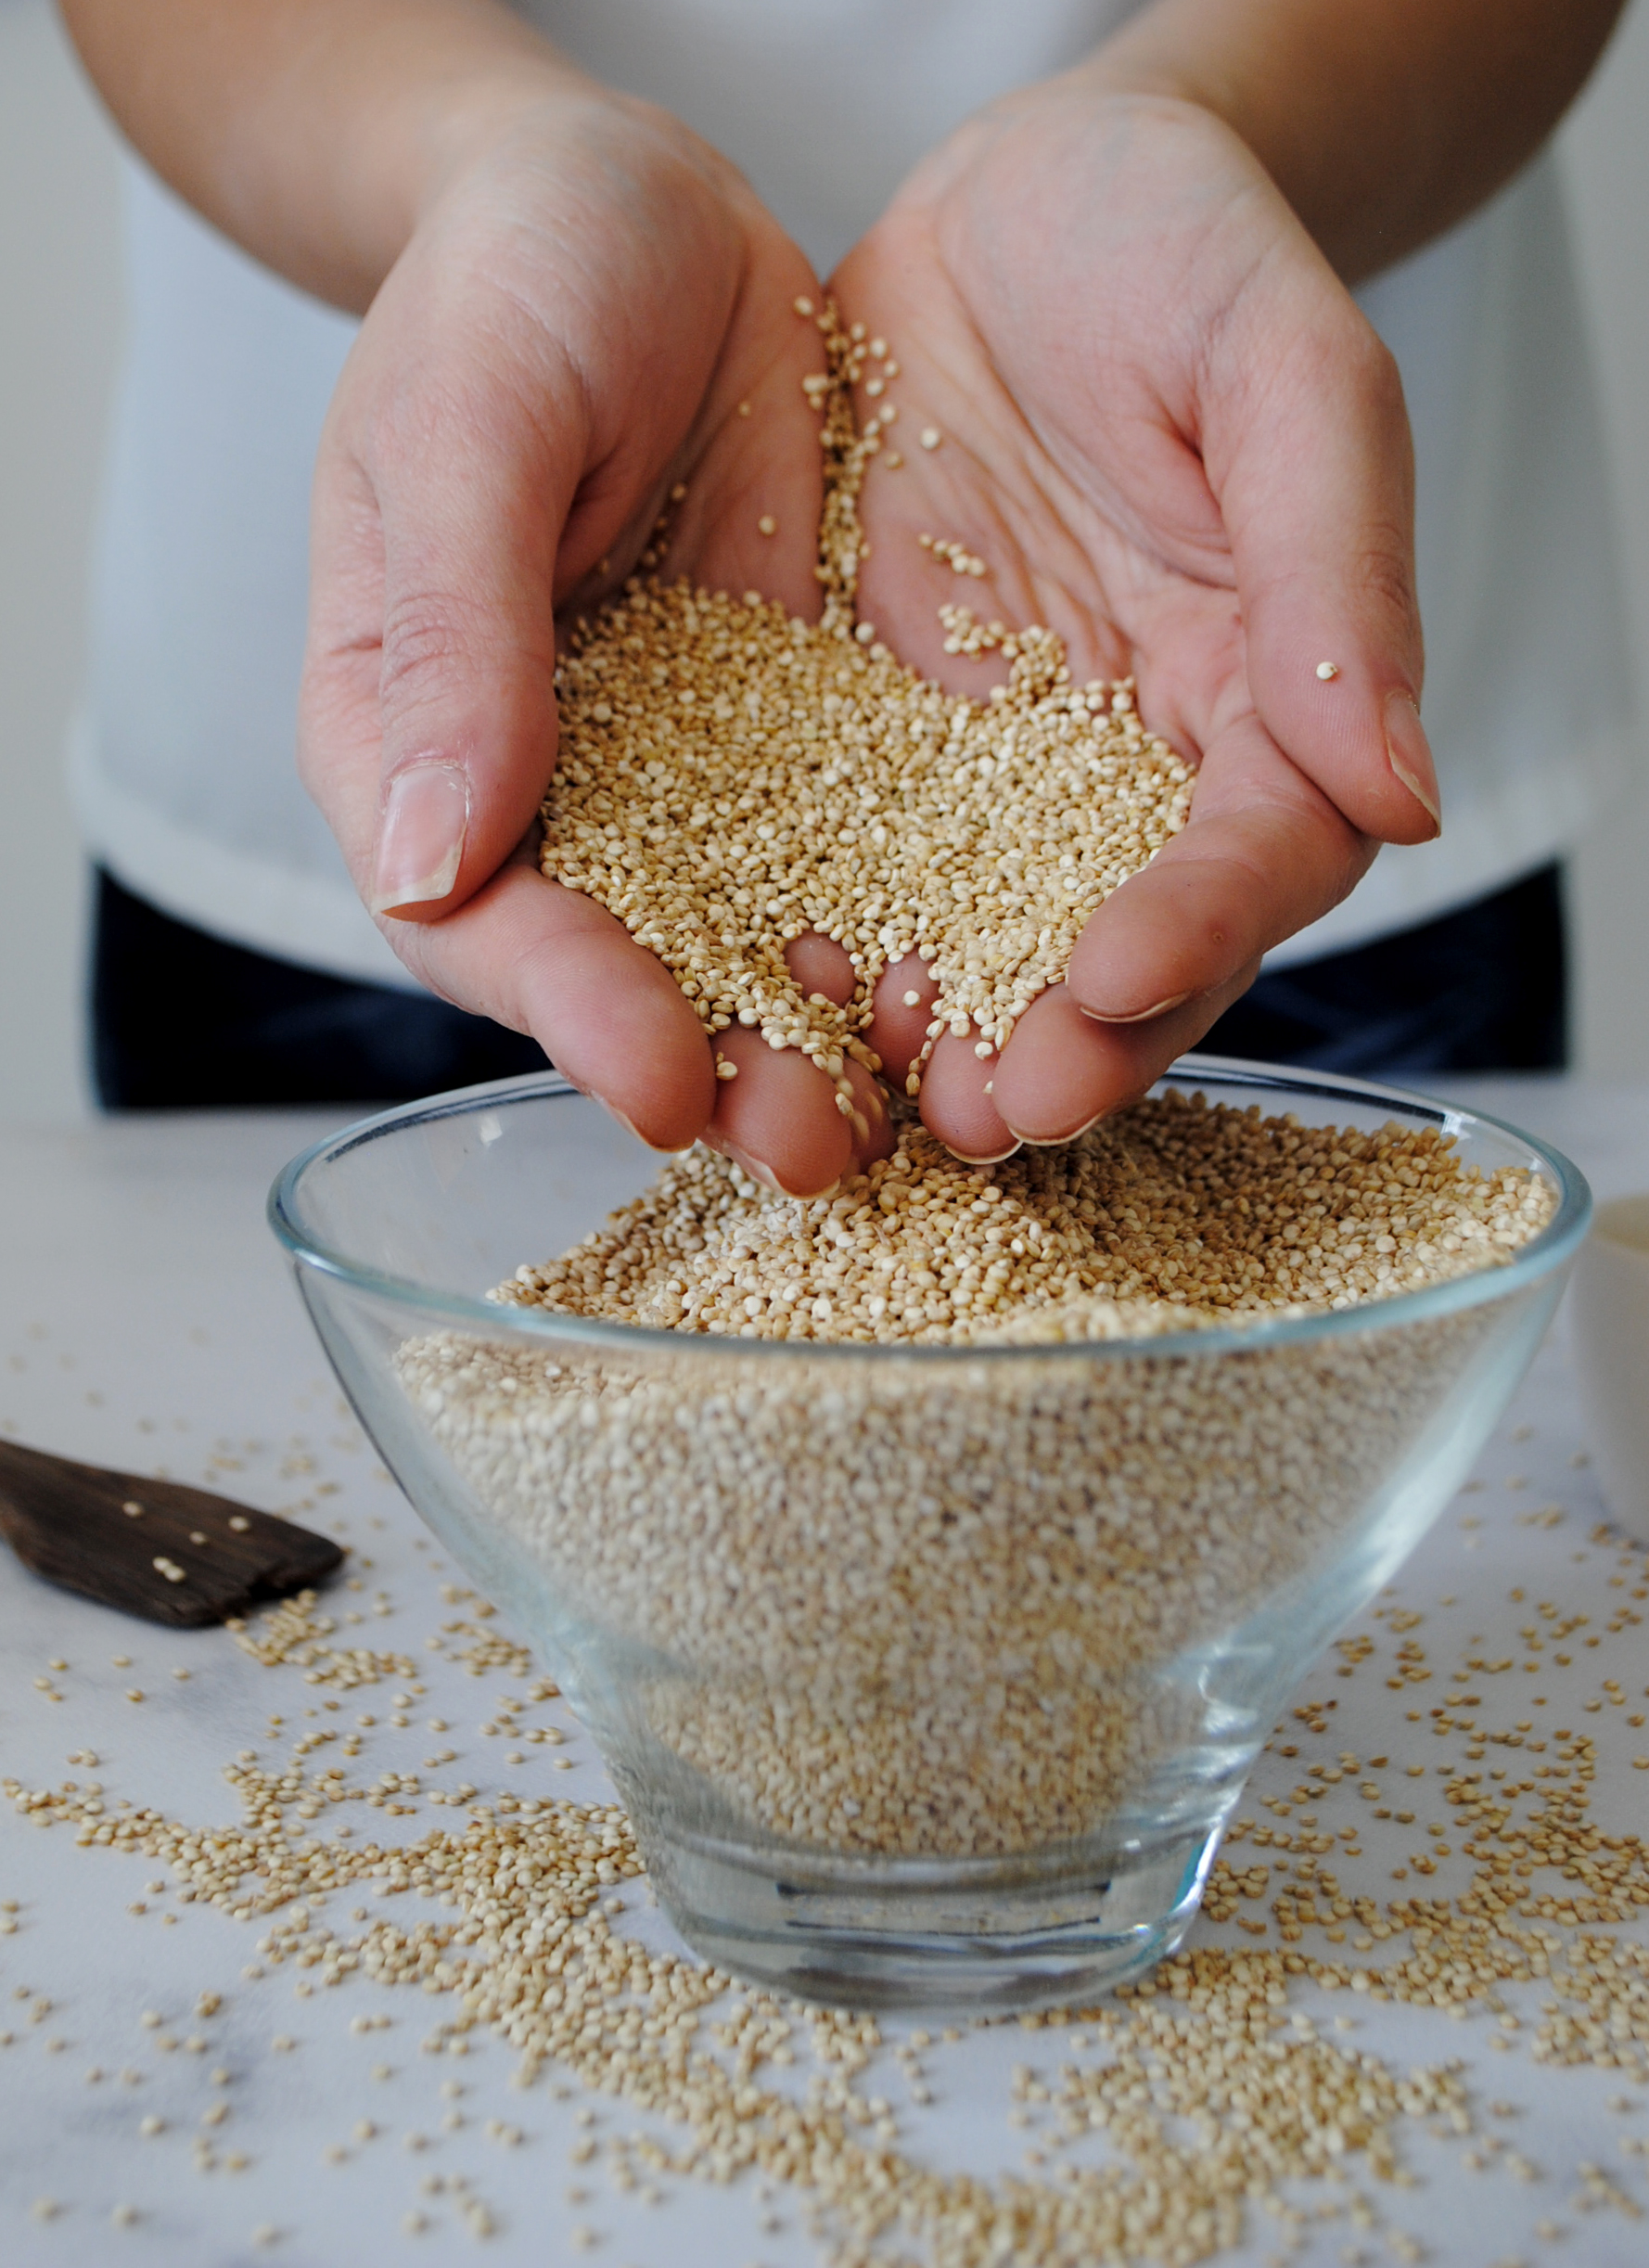 Quinoa held in cupped hands over a full bowl of quinoa